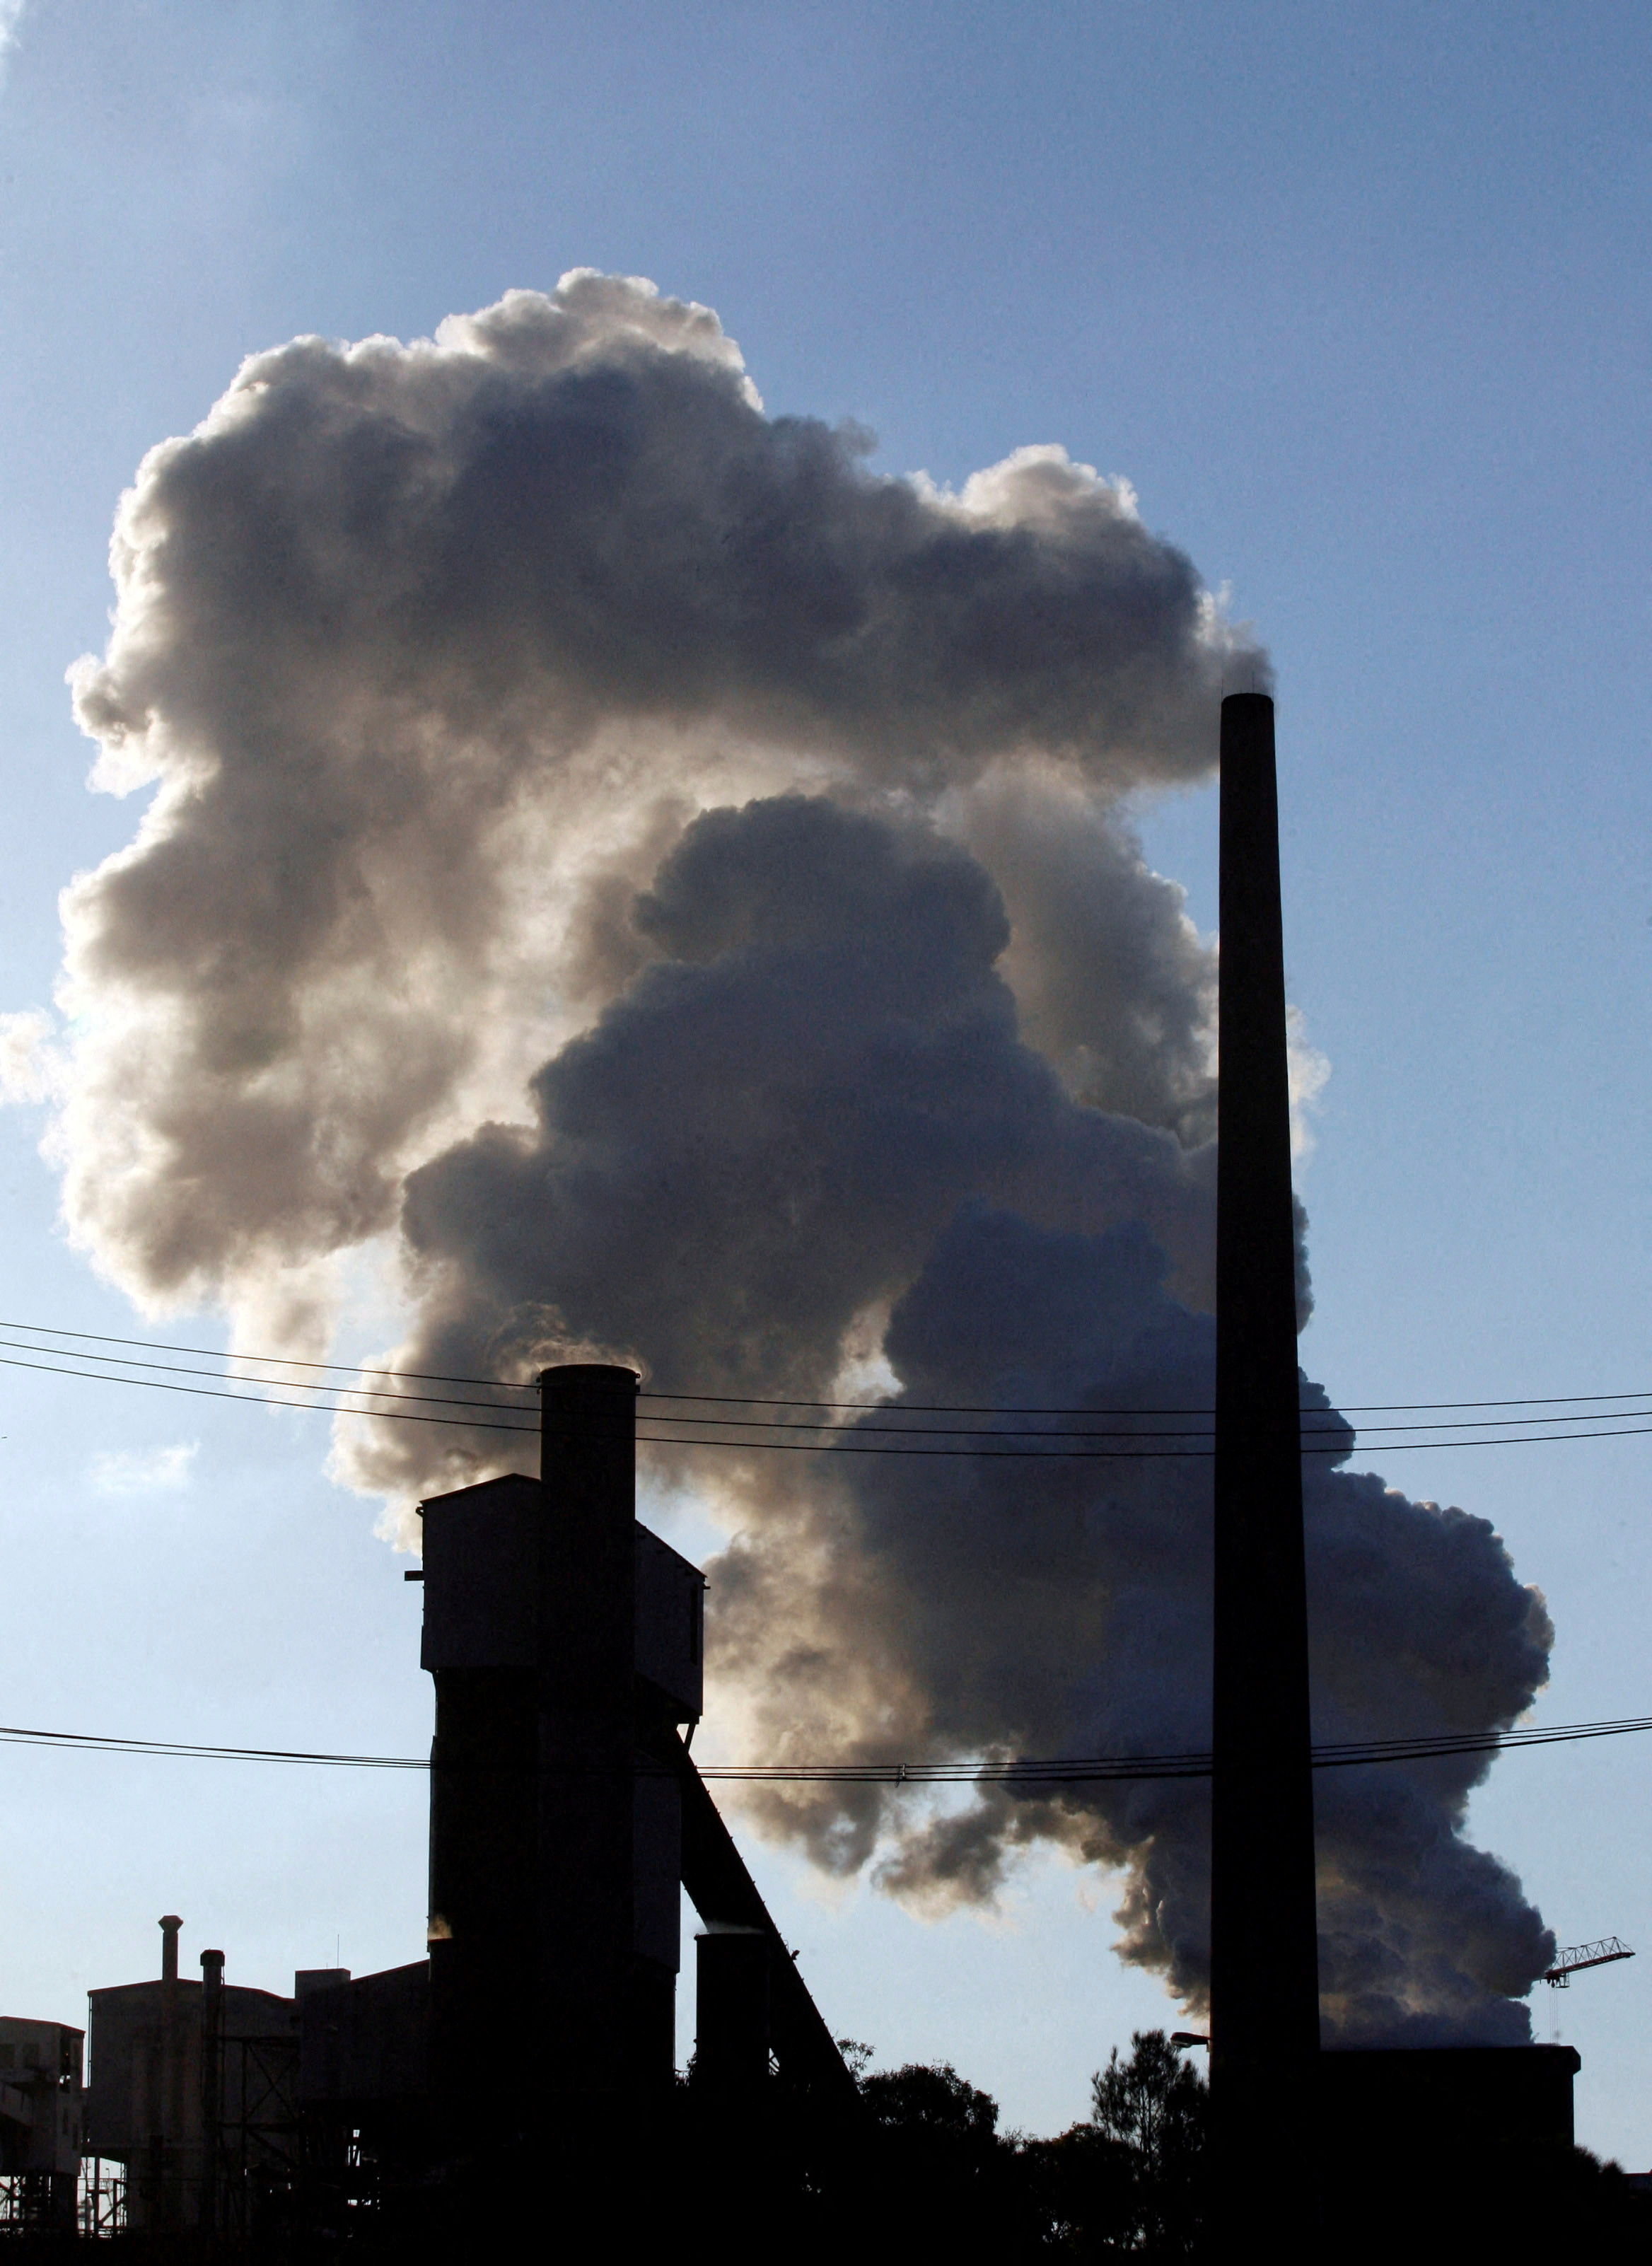 Emissions are released from a factory chimney at an industrial park in Wollongong